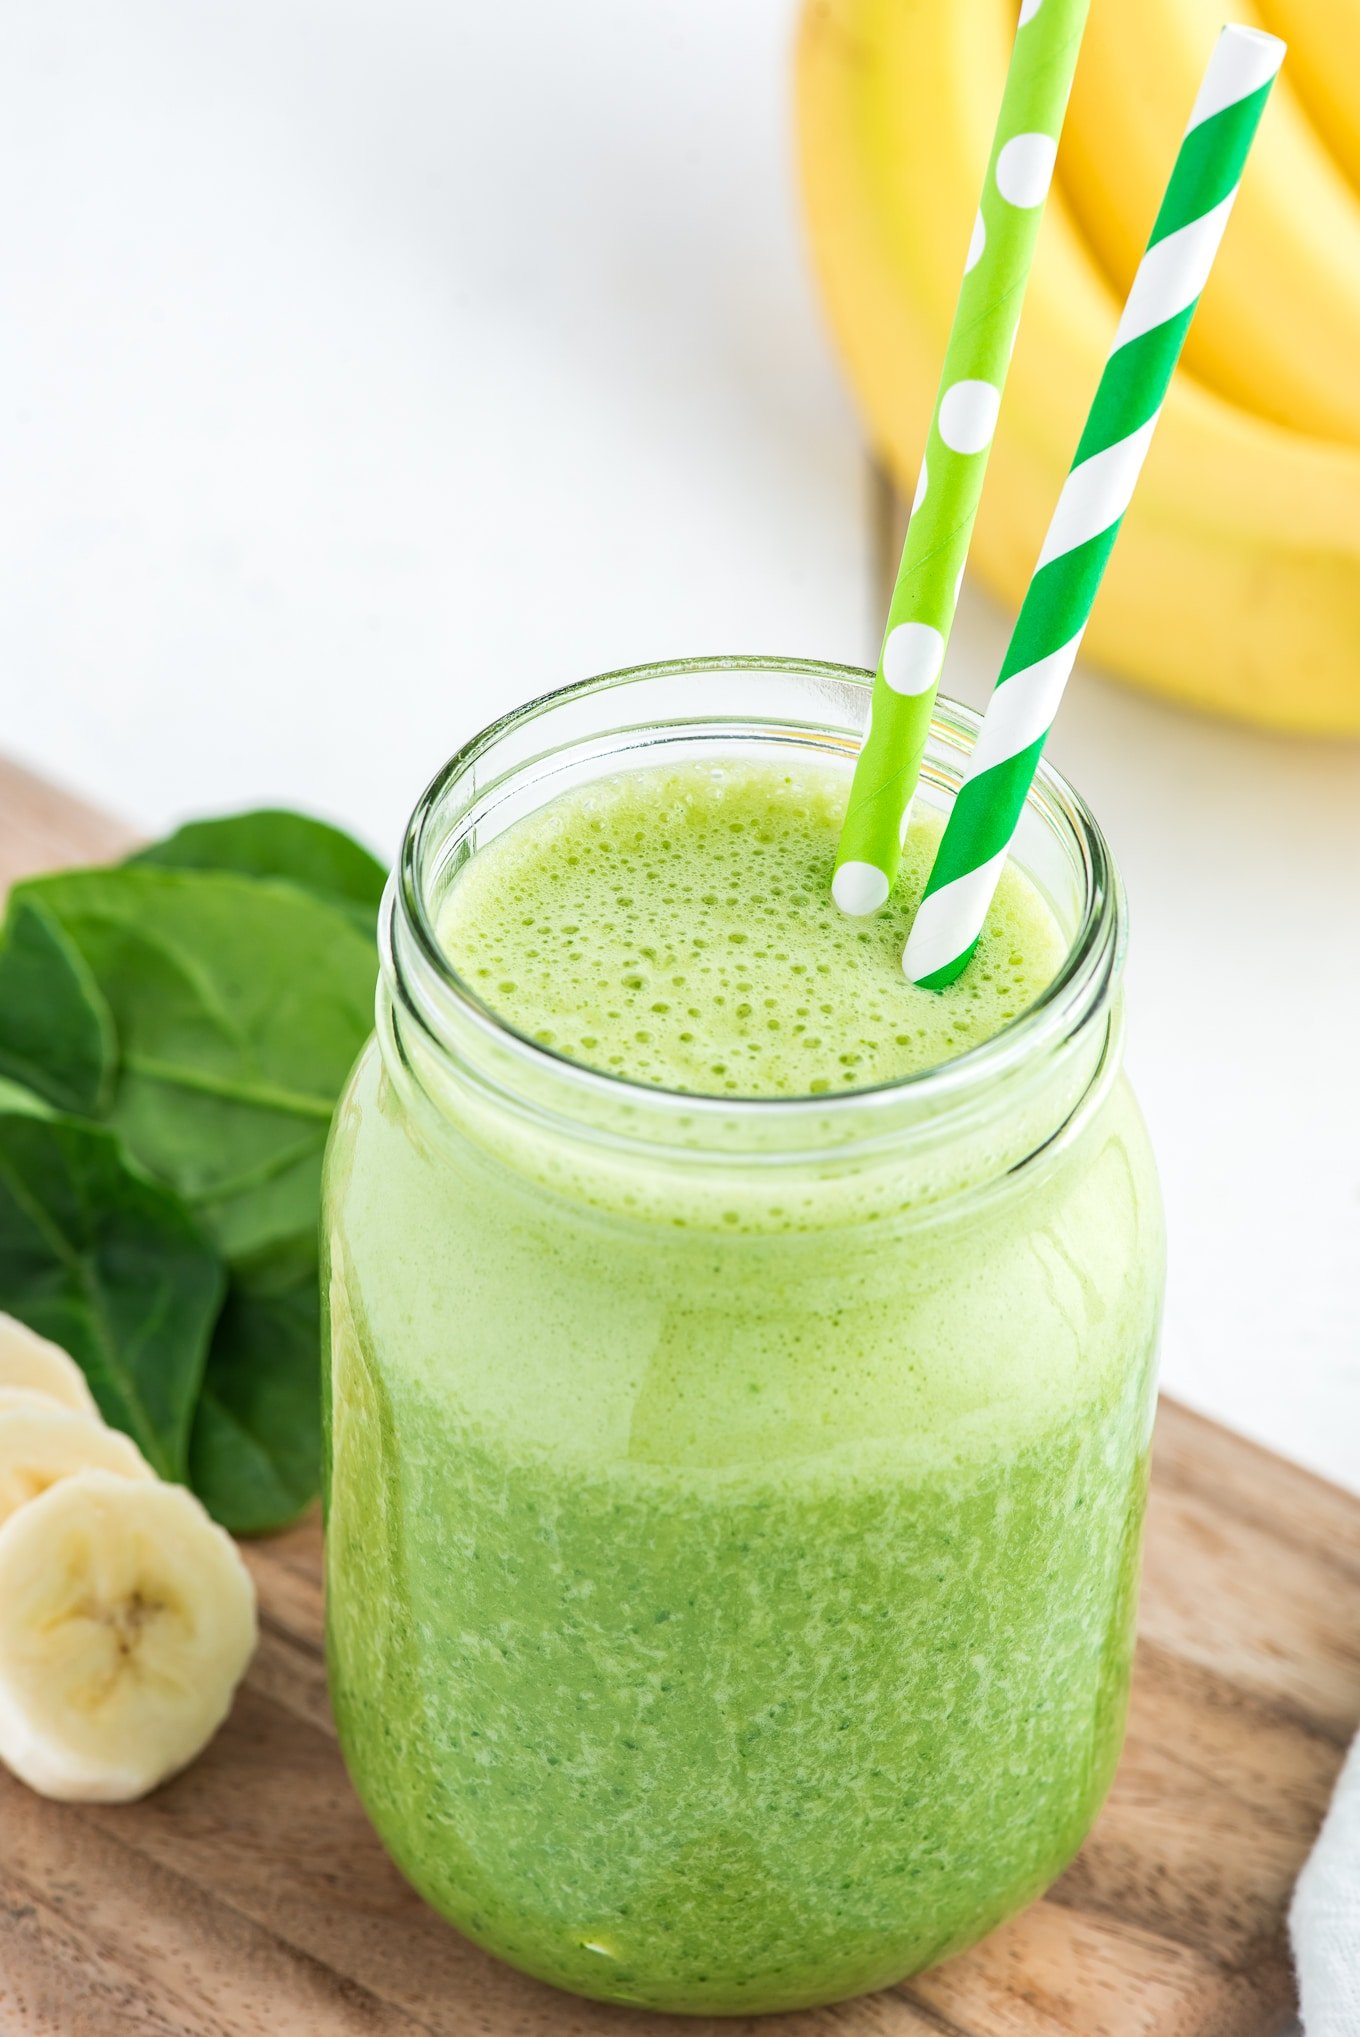 A green smoothie with spinach leaves and green striped and polka dot straws.